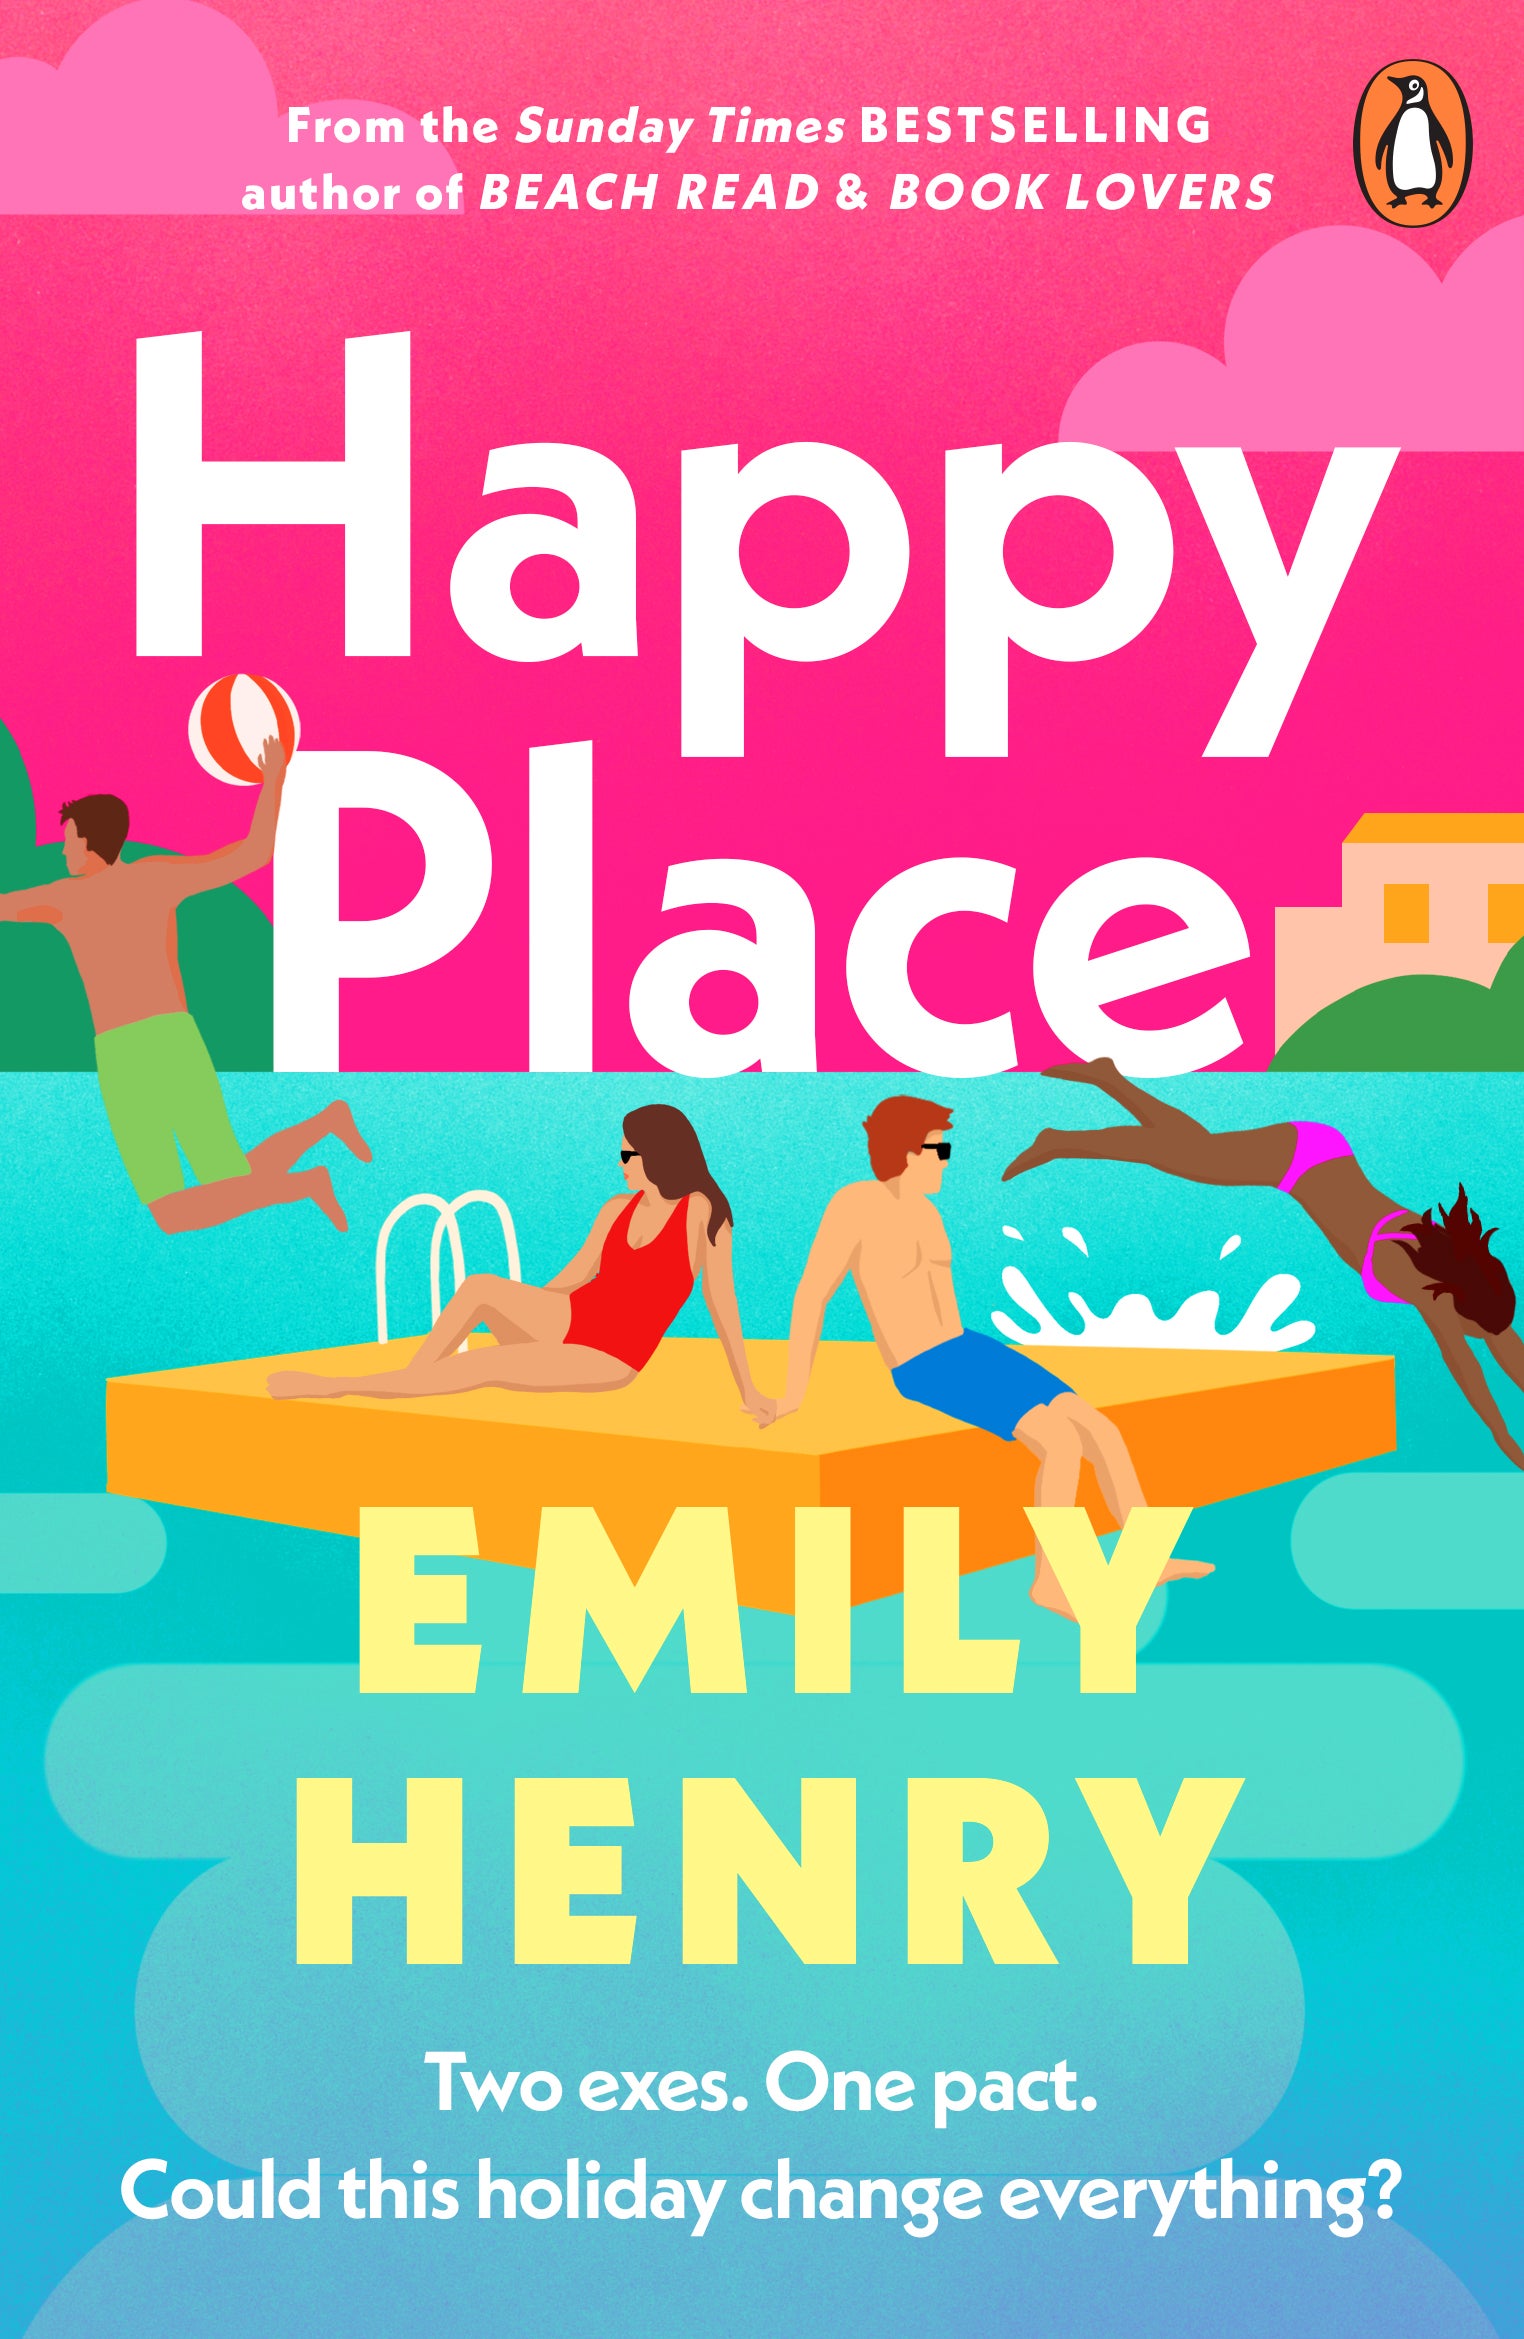 Happy Place is a ‘fake relationship’ romp between a junior doctor and a carpenter she’s pretending to date